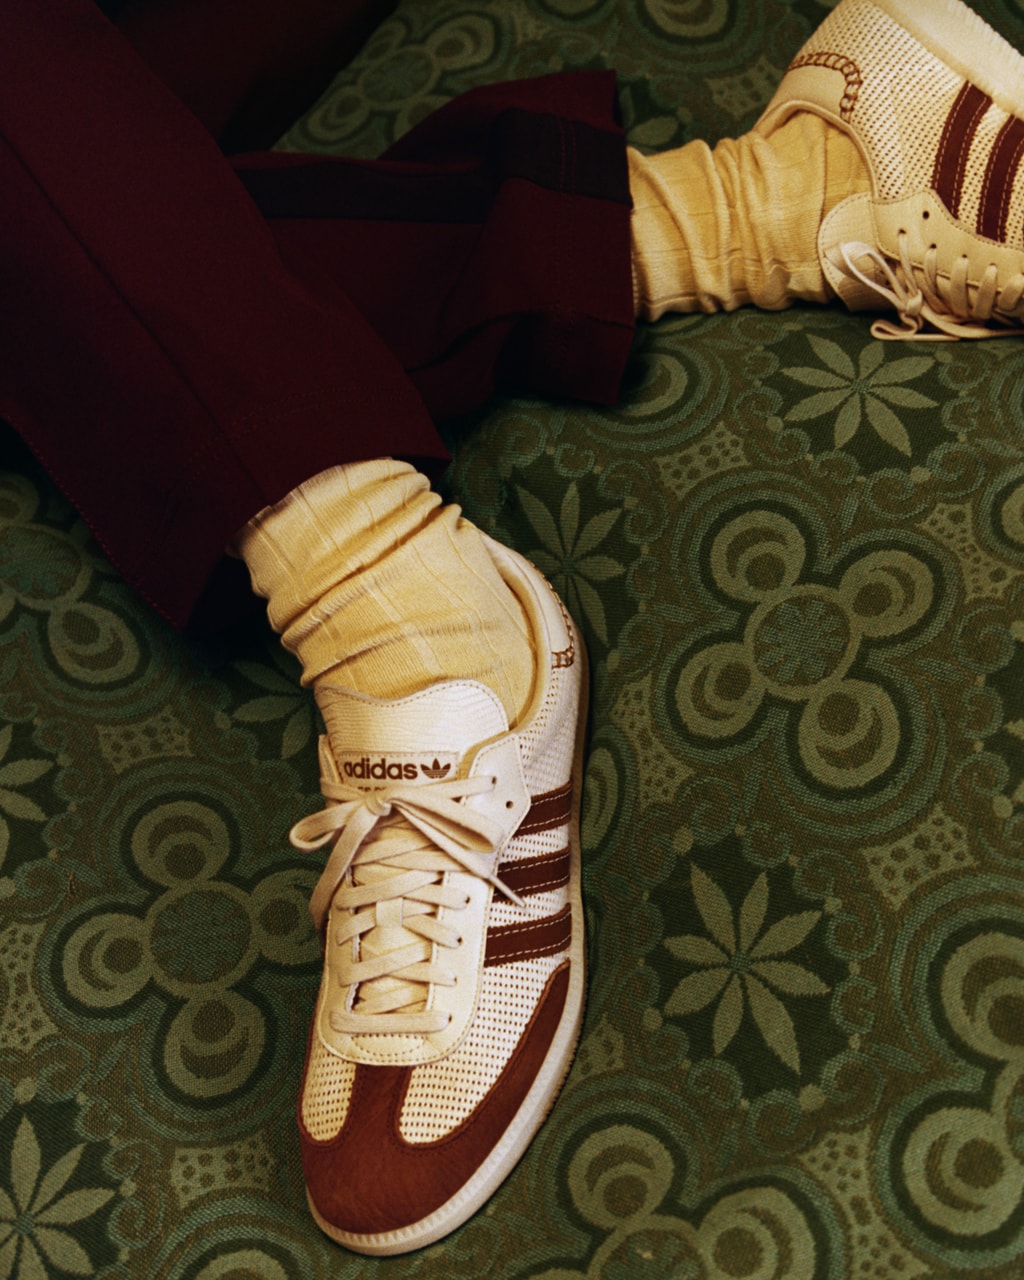 Grace Wales Bonner x adidas Samba, SL72 FW20 collaboration sneakers release date info buy colorway